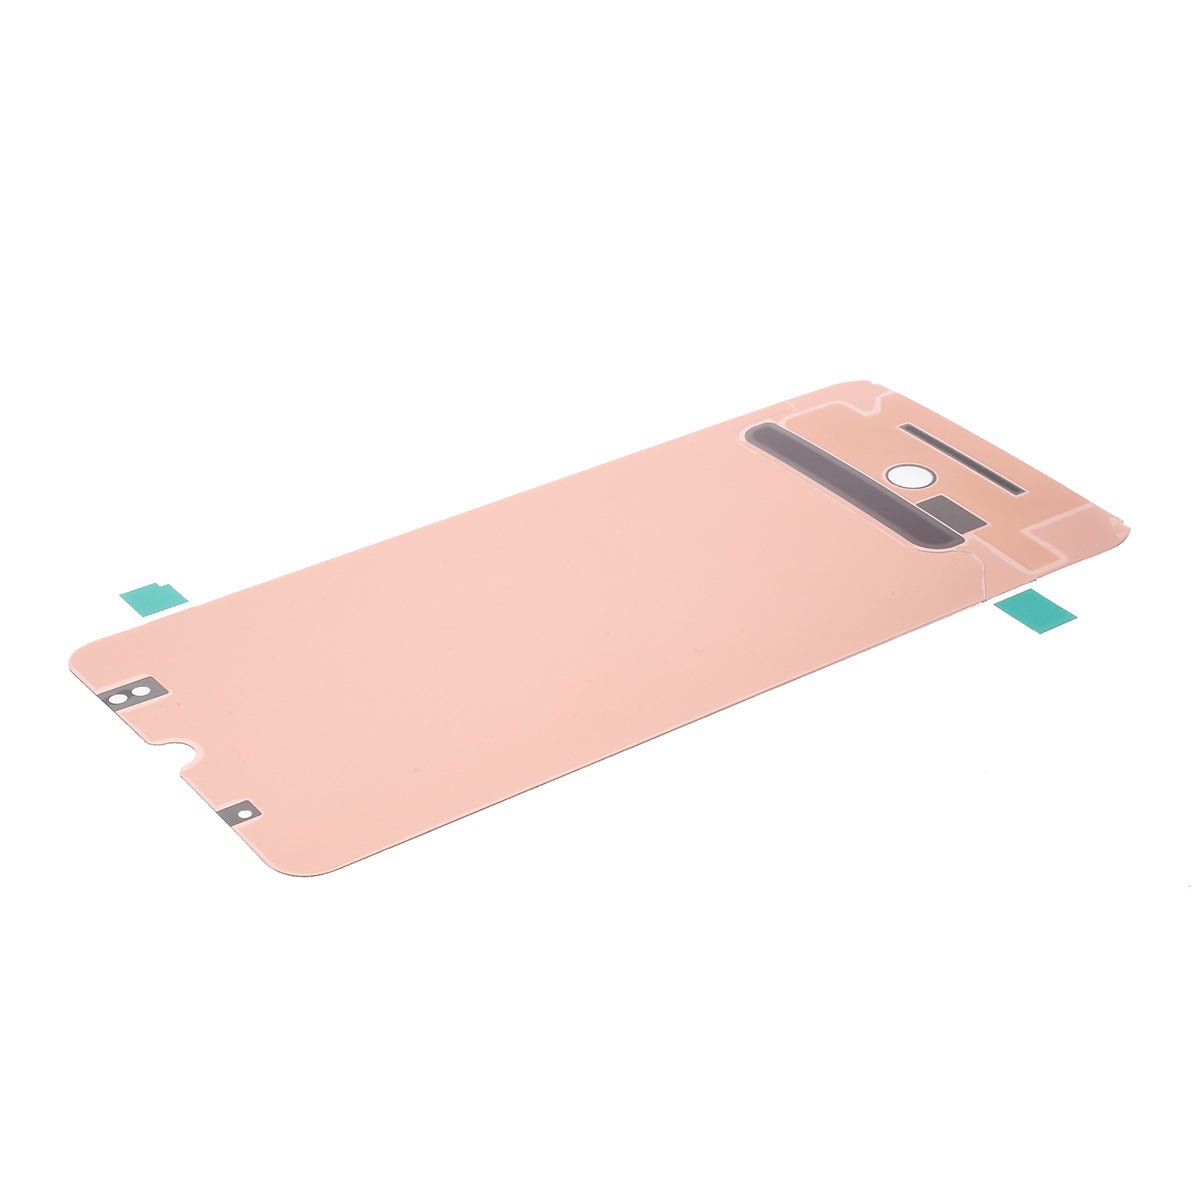 OEM Back LCD Screen Sticker Part for Samsung Galaxy A70/Galaxy A70S